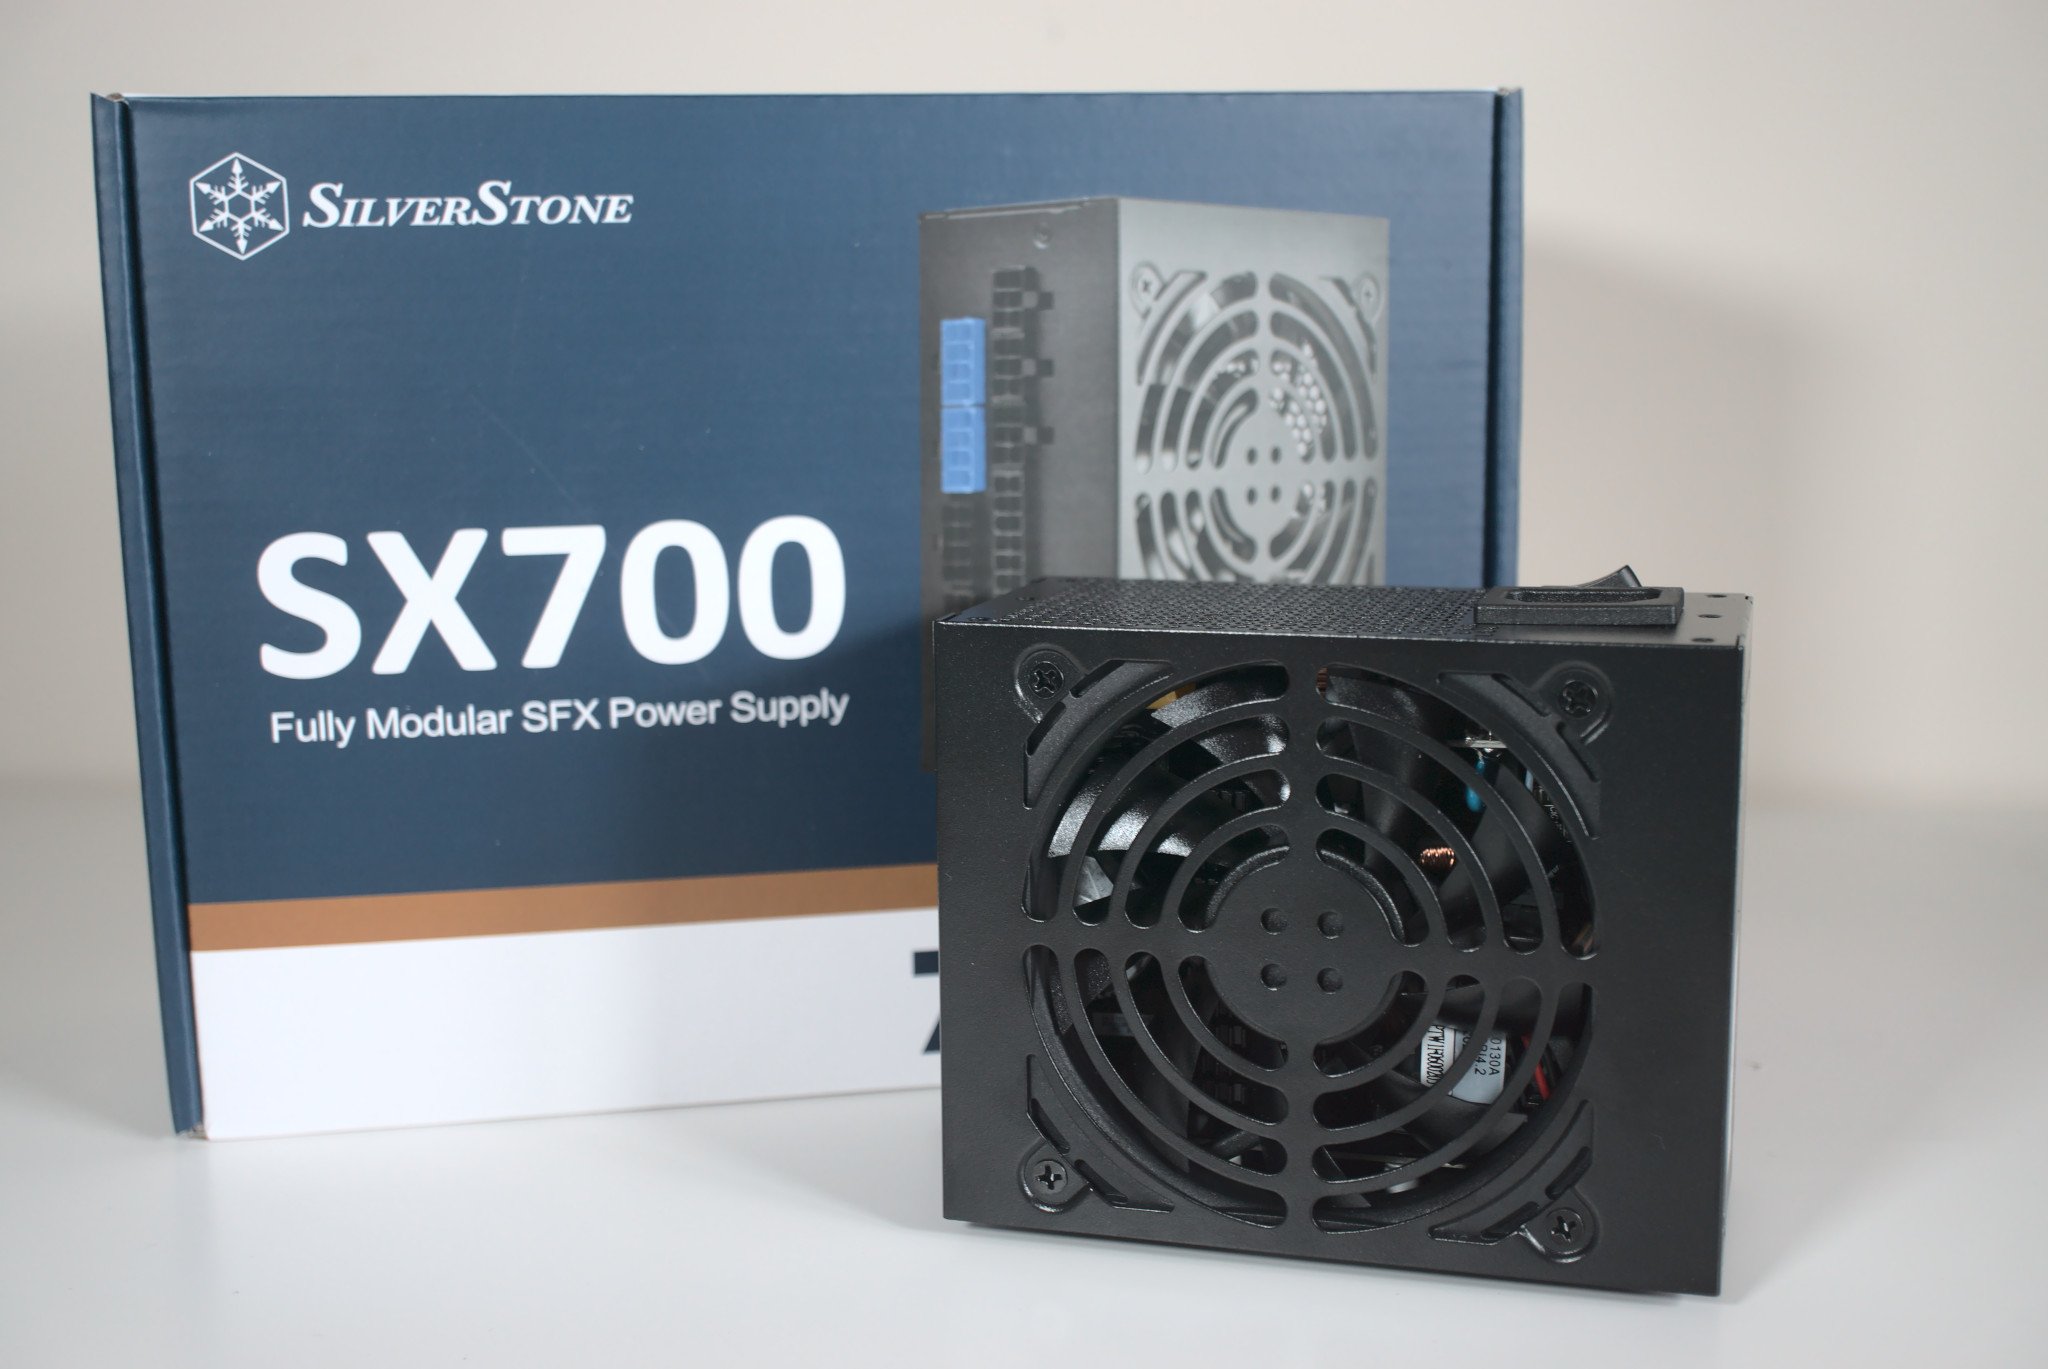 Are Silverstone Power Supplies Good? 